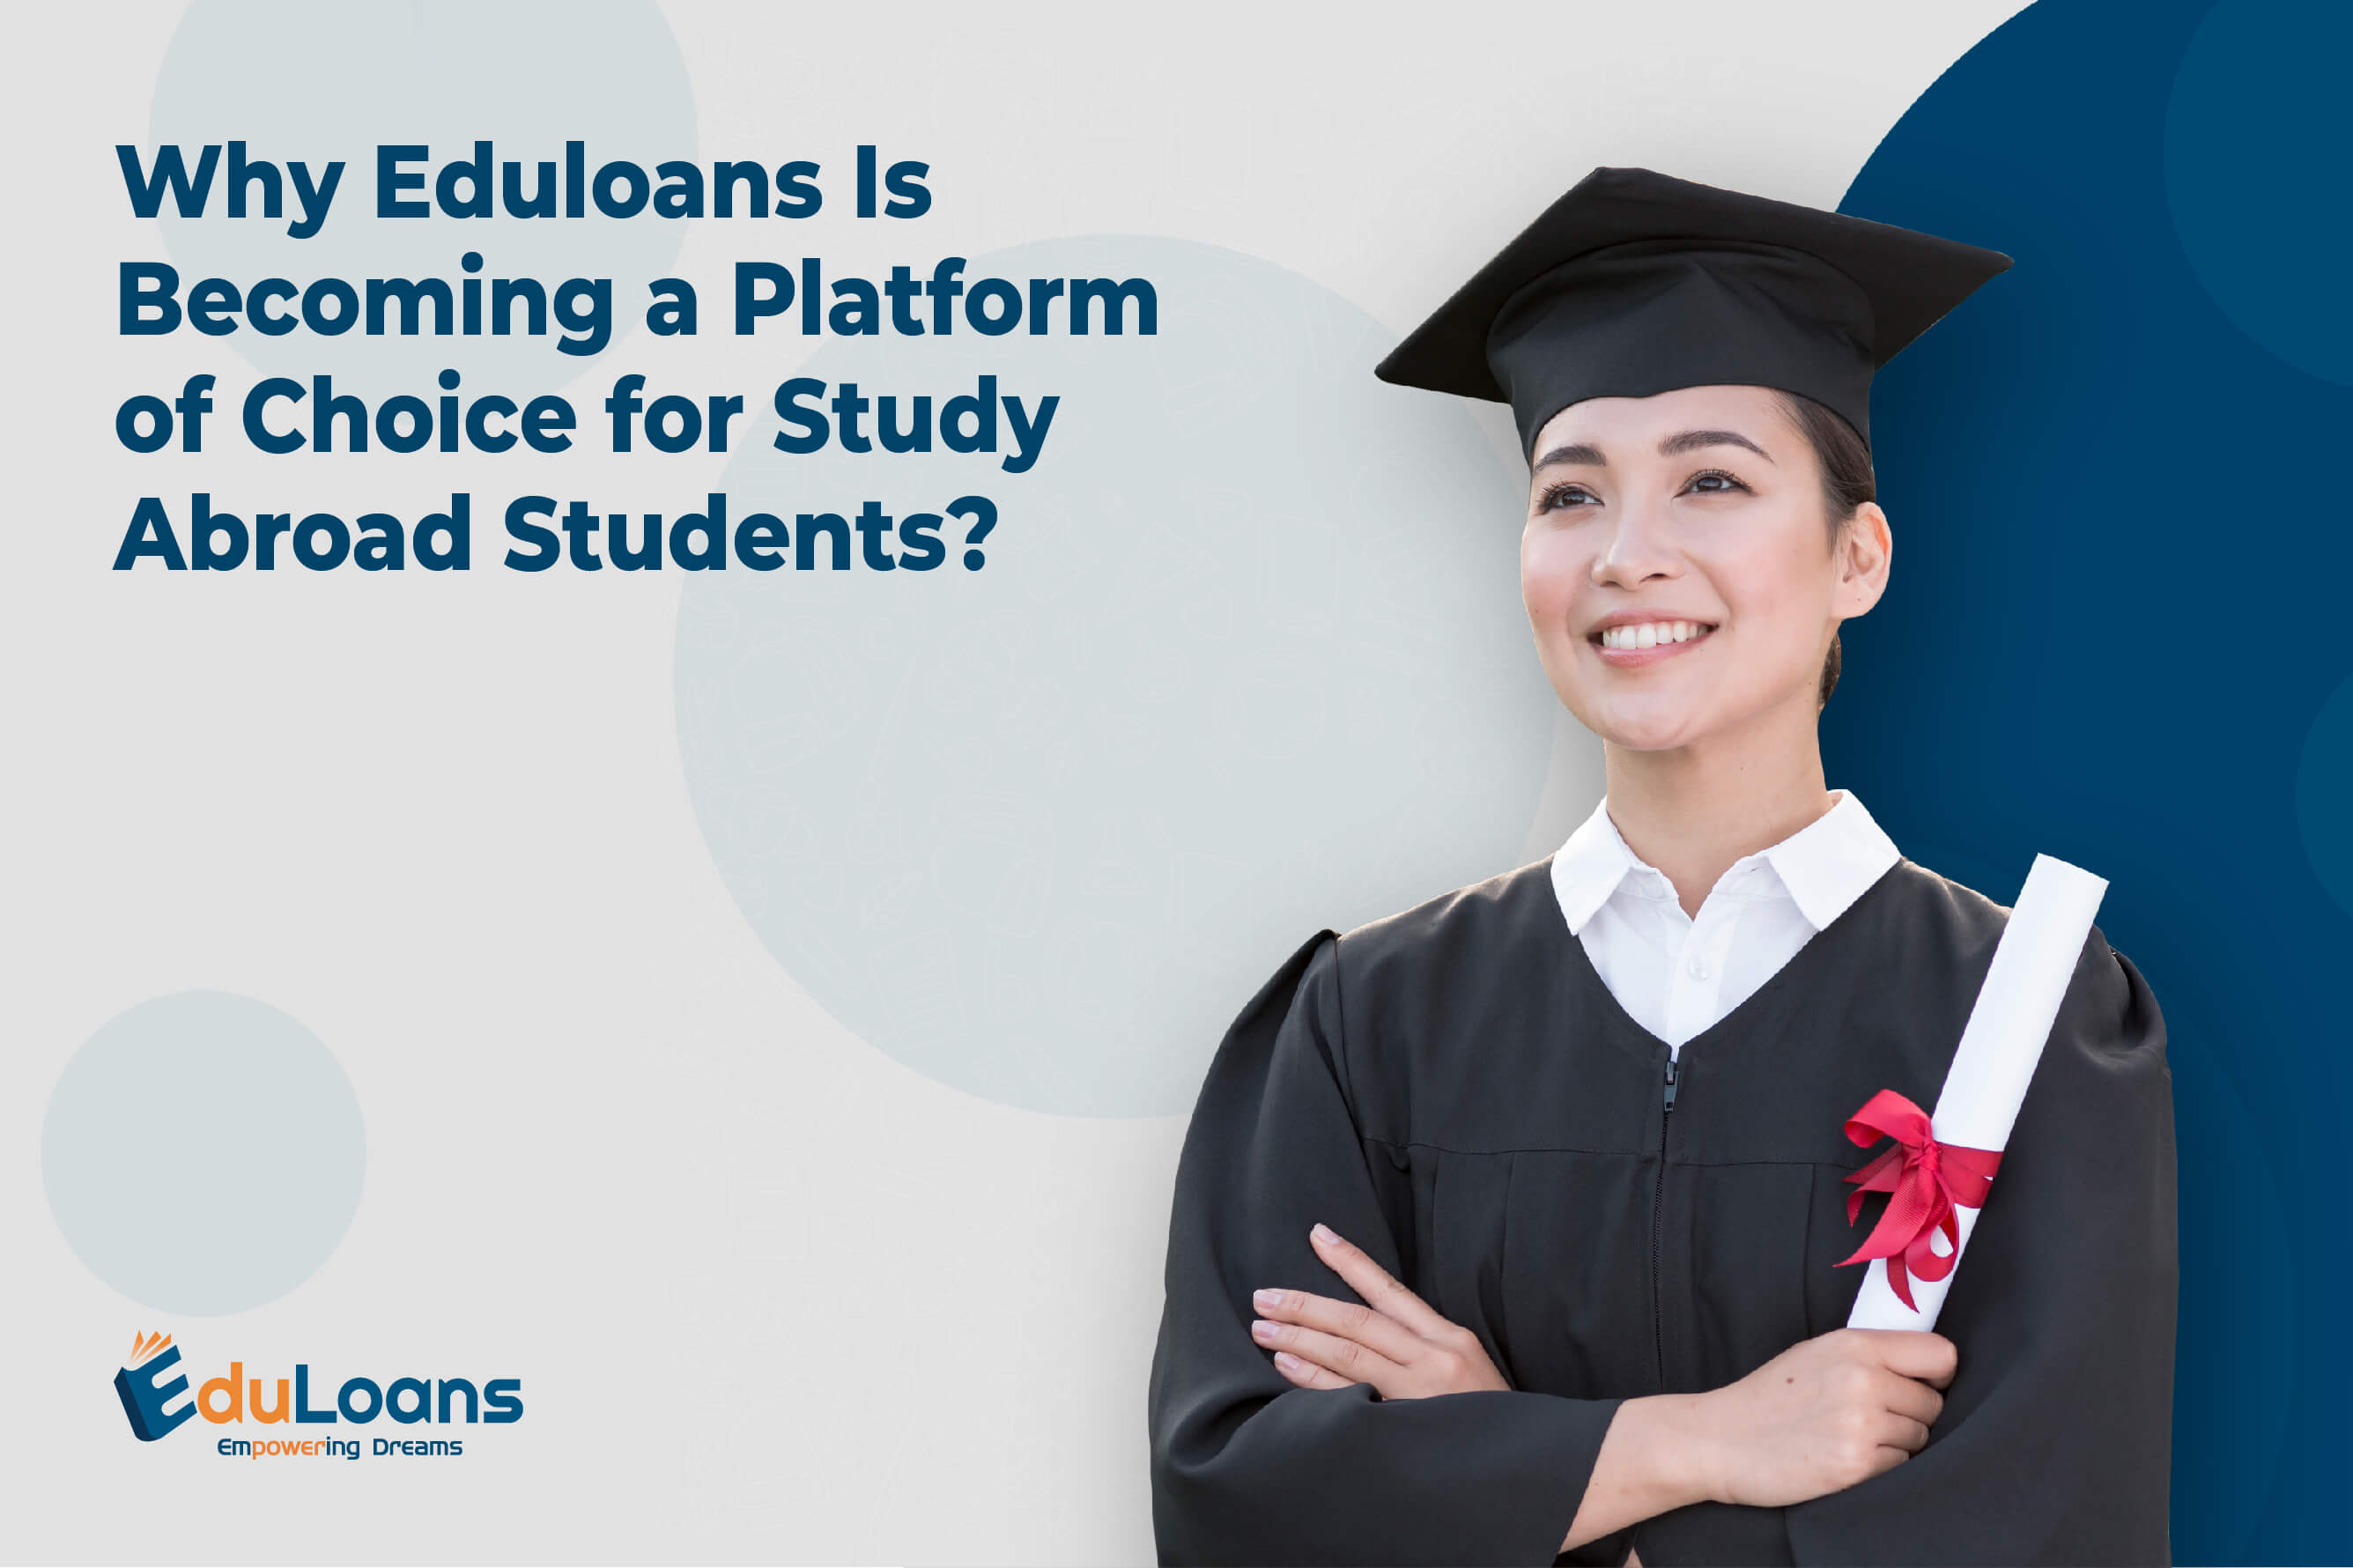 Why Eduloans is becoming a platform of choice for study abroad students?